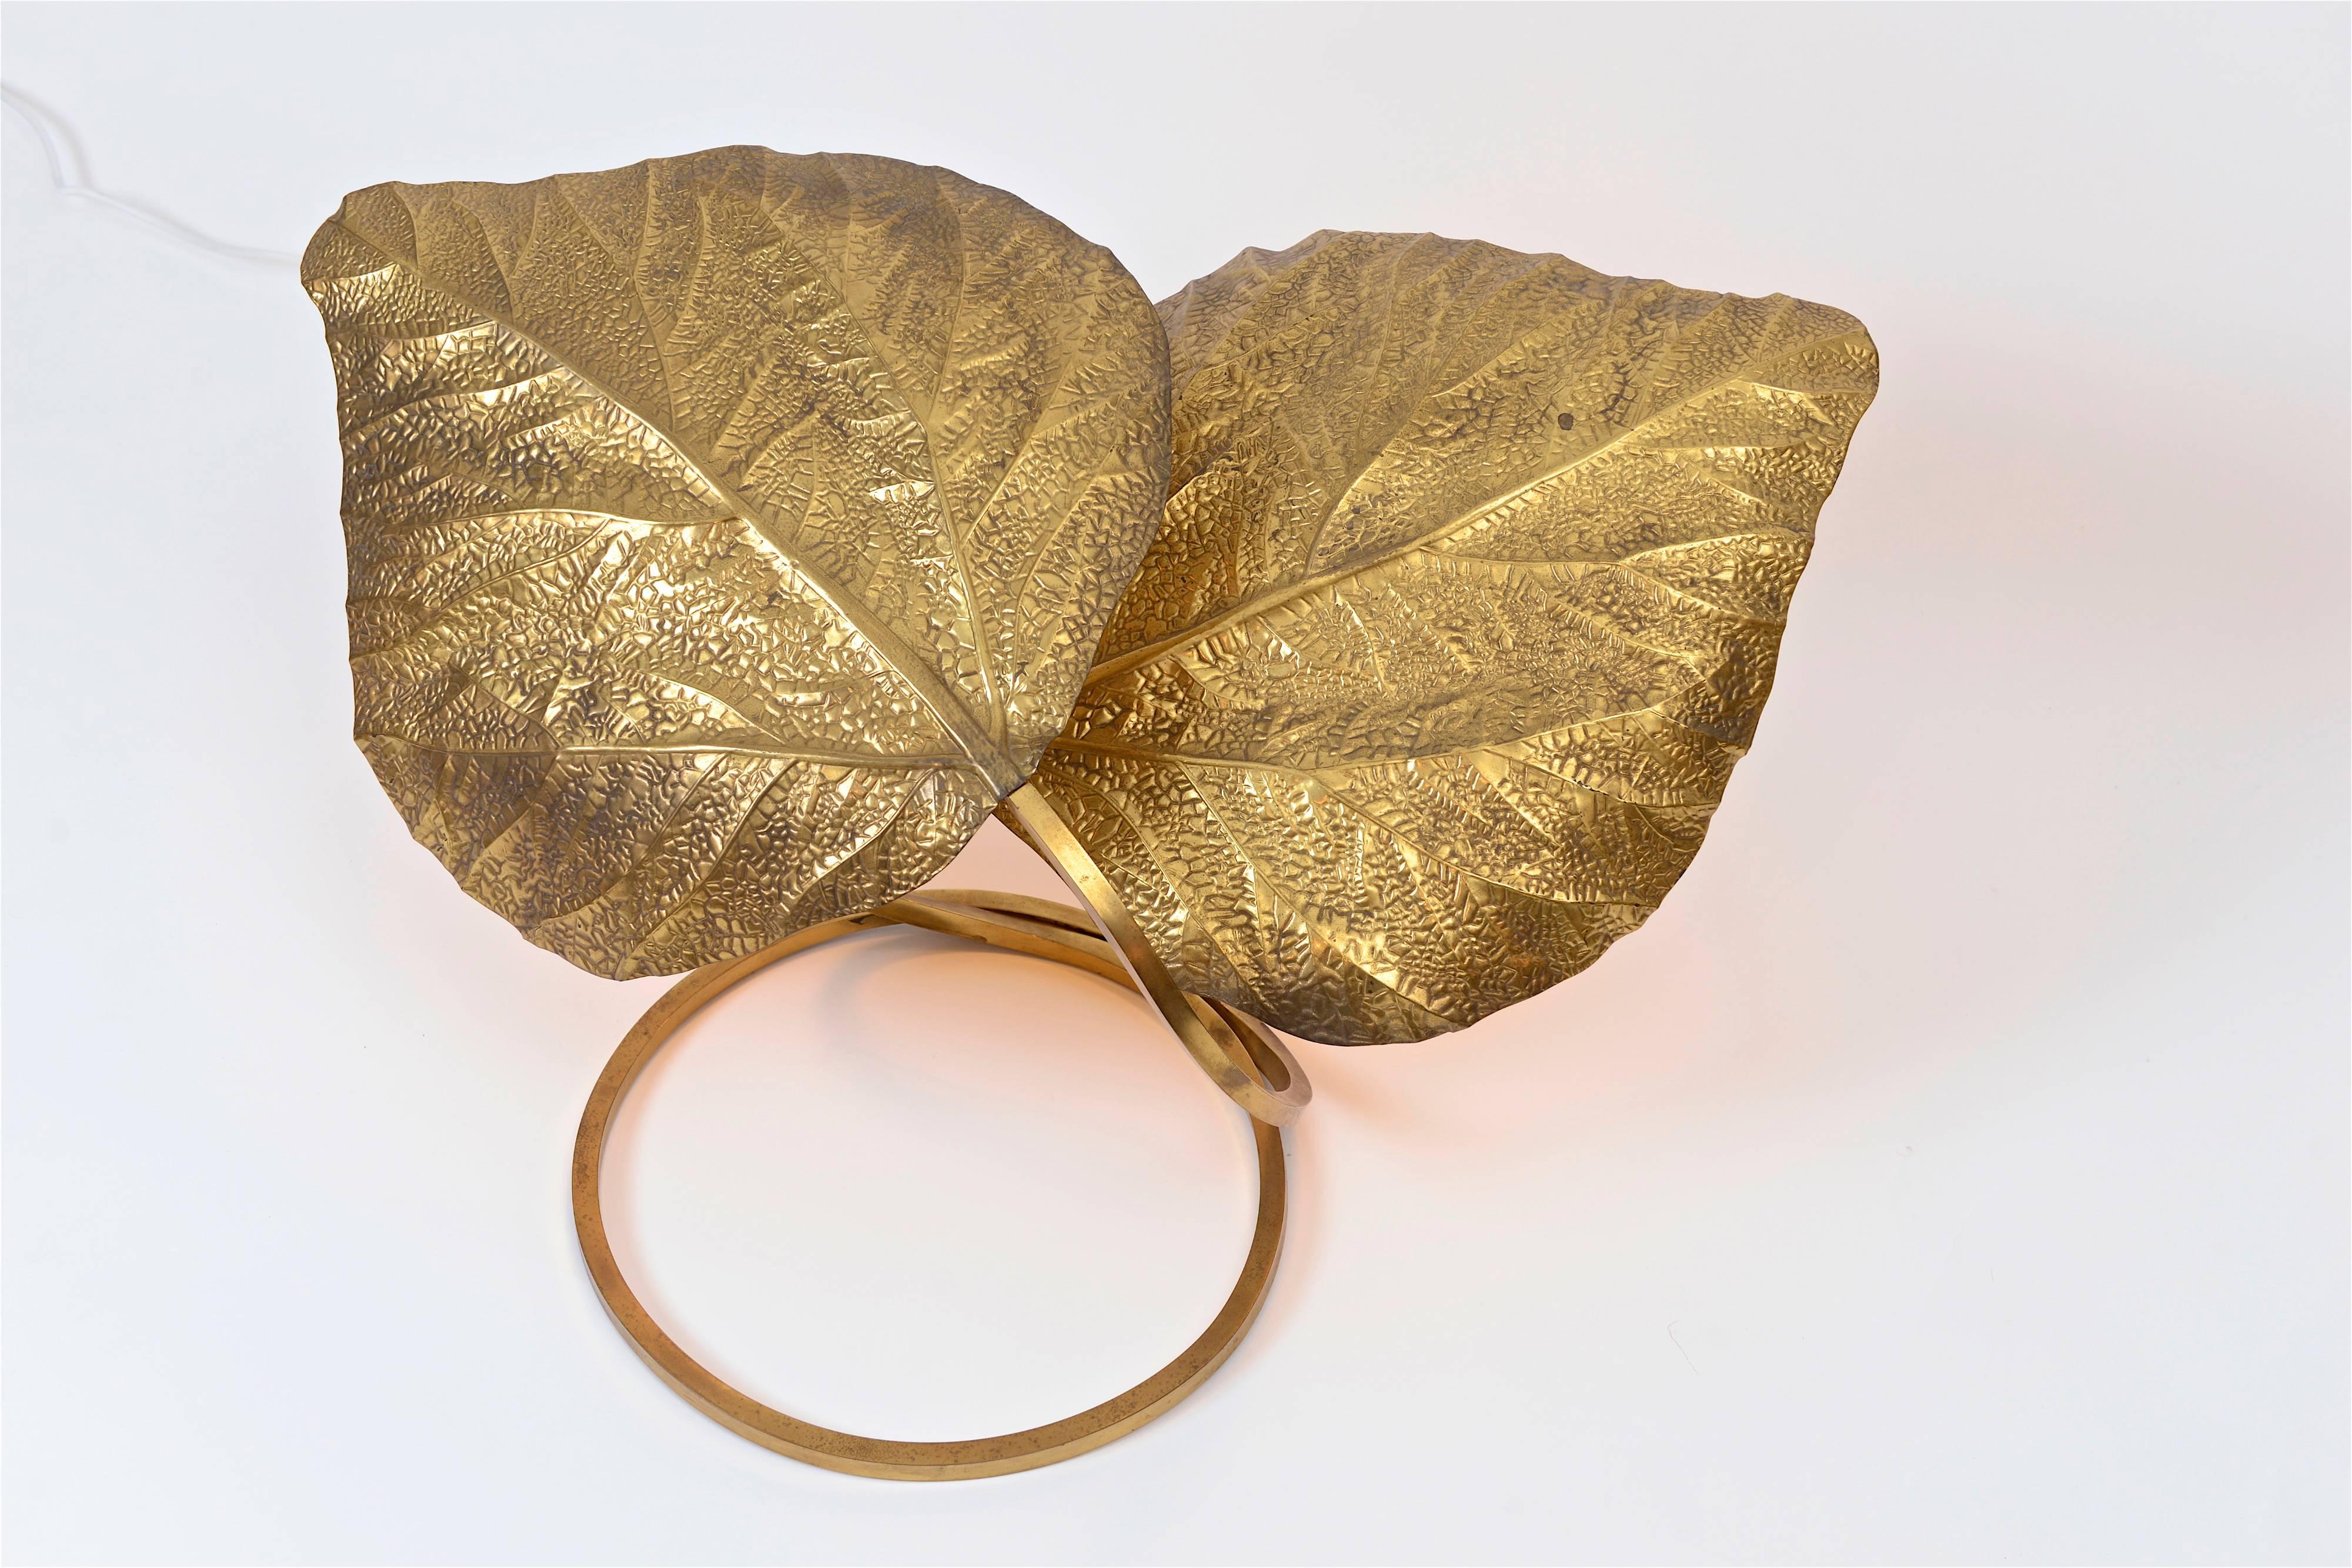 A superb example of a two-leaf 'Rhubarb' table light by Tommaso Barbi for Carlo Giorgi. Produced in Italy in the 1970s, the decorative hammered brass leaves each feature a single light fitting on the underside which beautifully reflect the gold